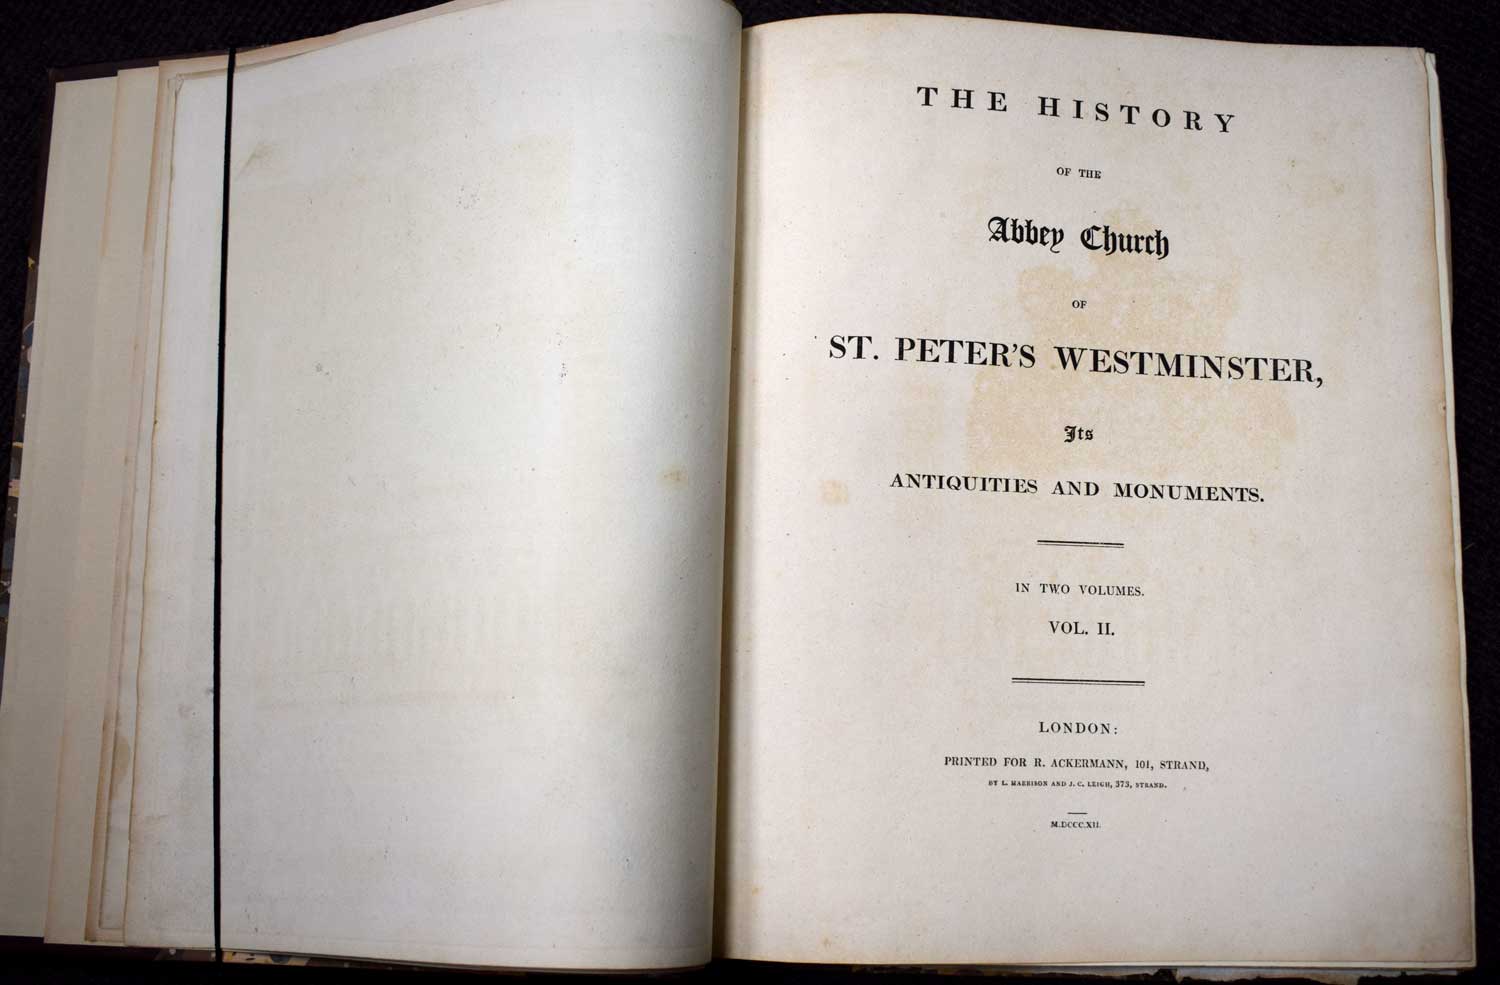 The History of the Abbey Church of St. Peter's Westminster, Its Antiquities and Monuments. Deluxe Binding. Two Volume Set.